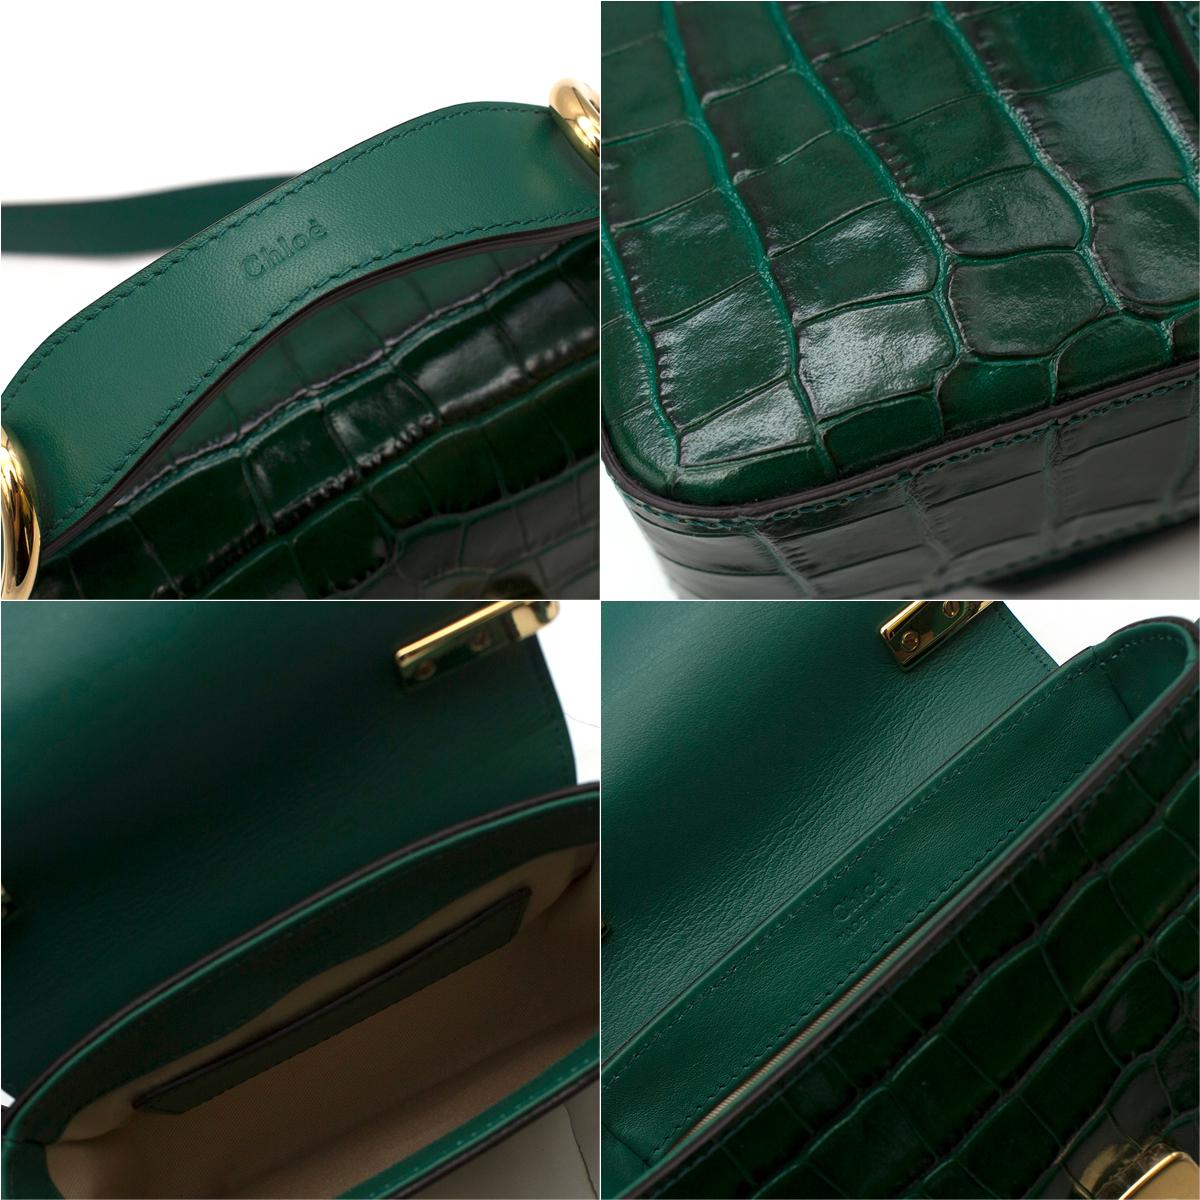 Chloe C Mini Croc-effect Leather Shoulder Bag in Emerald - New Season In Excellent Condition In London, GB